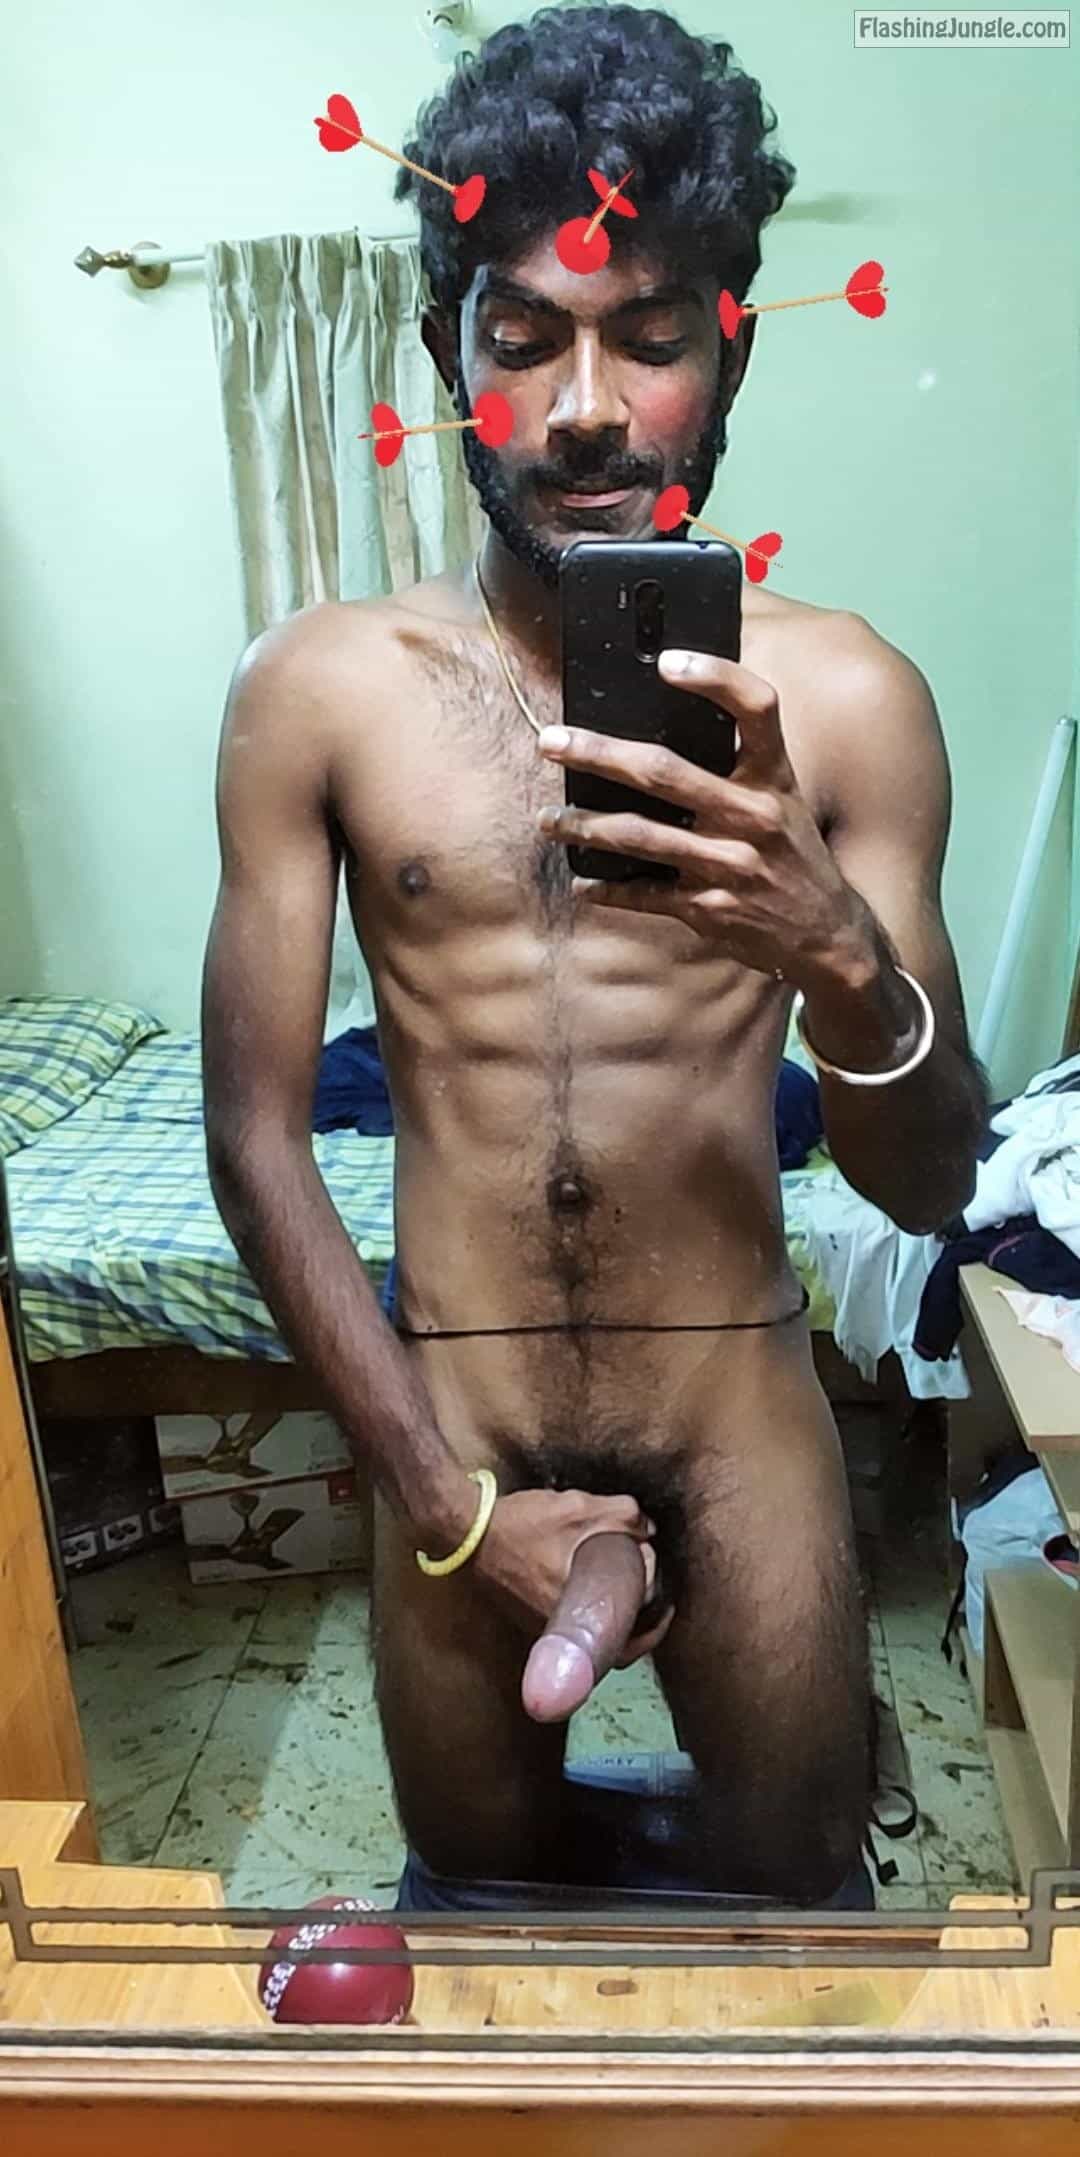 Room selfie Dick Flash Pics, Real Amateurs from Google, Tumblr, Pinterest, Facebook, Twitter, Instagram and Snapchat.